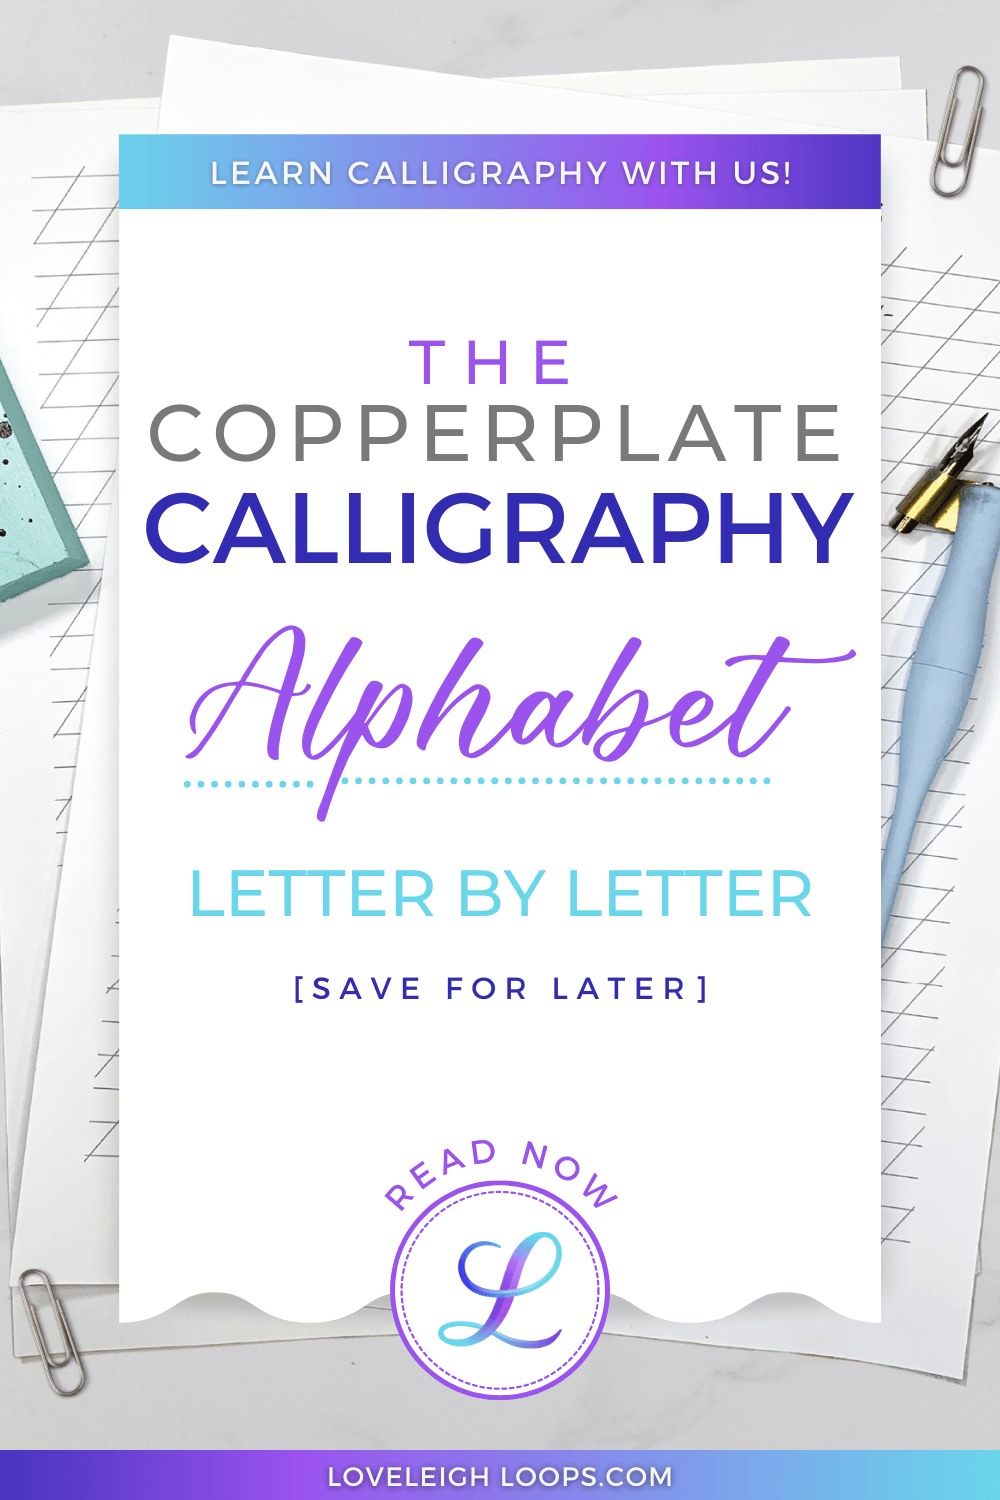 Calligraphy Practice Workbook : Calligraphy and Hand Lettering Practice  Notepad: Modern Calligraphy Slant Angle Lined Guide, Alphabet Practice &  Dot